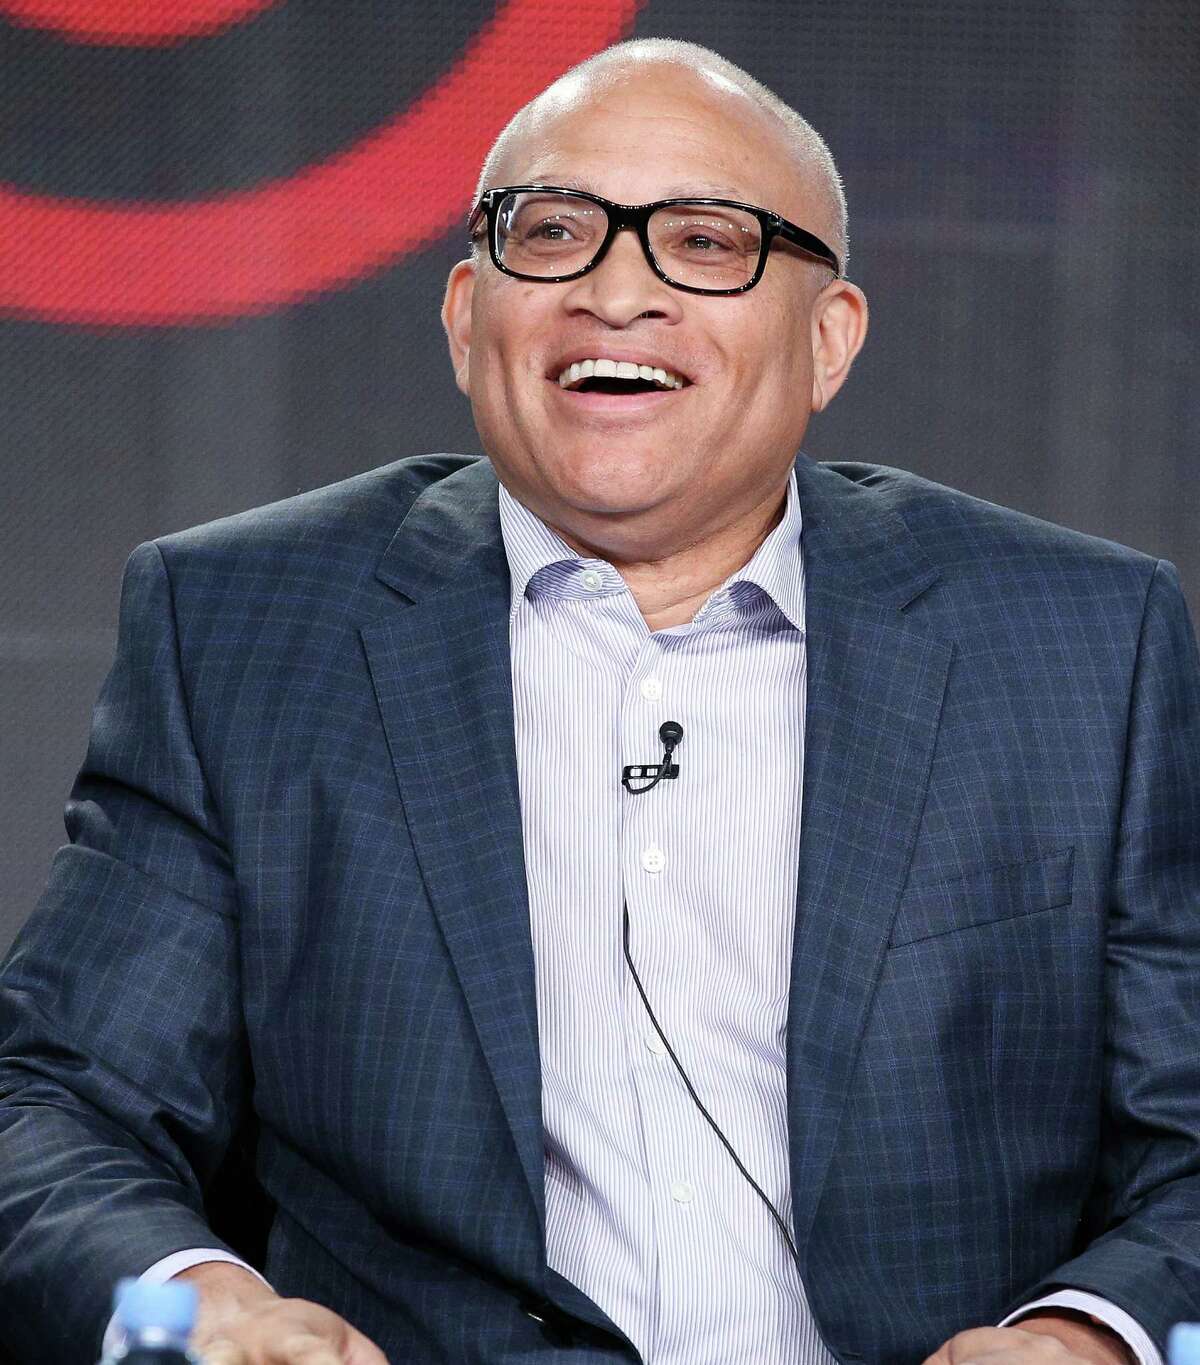 PASADENA, CA - JANUARY 10: Host Larry Wilmore speaks onstage during the Viacom Winter Television Critics Association (TCA) press tour at The Langham Huntington Hotel and Spa on January 10, 2015 in Pasadena, California. (Photo by Imeh Akpanudosen/Getty Images for Viacom)